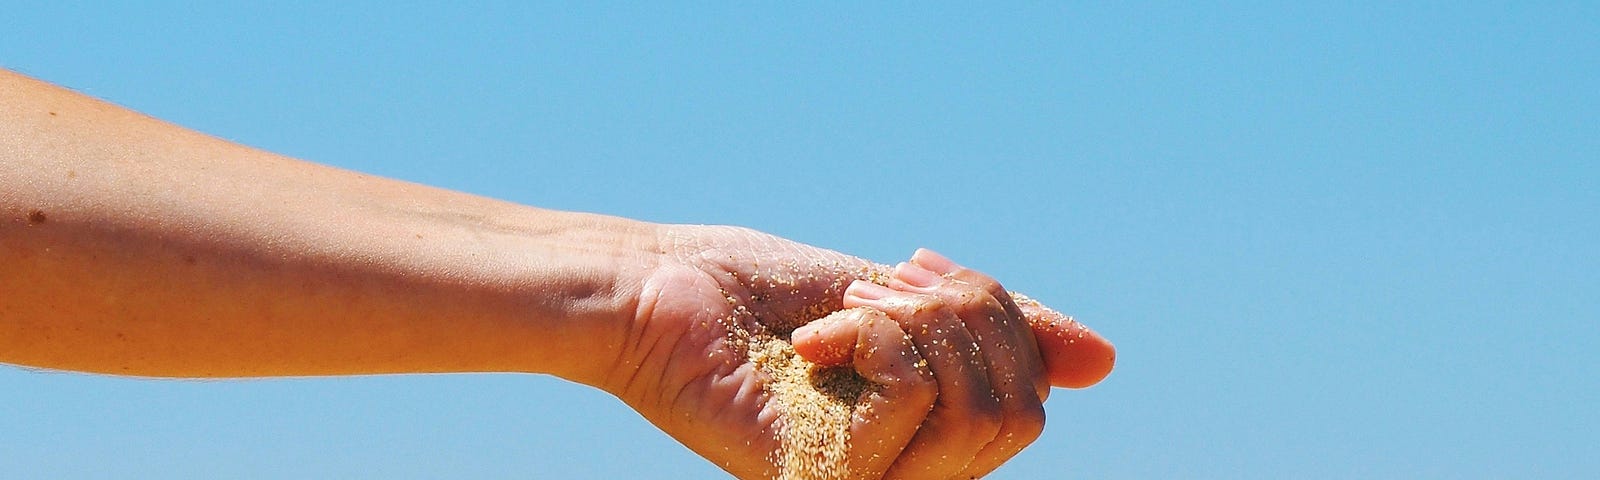 Person’s hand holding sand at the beach.